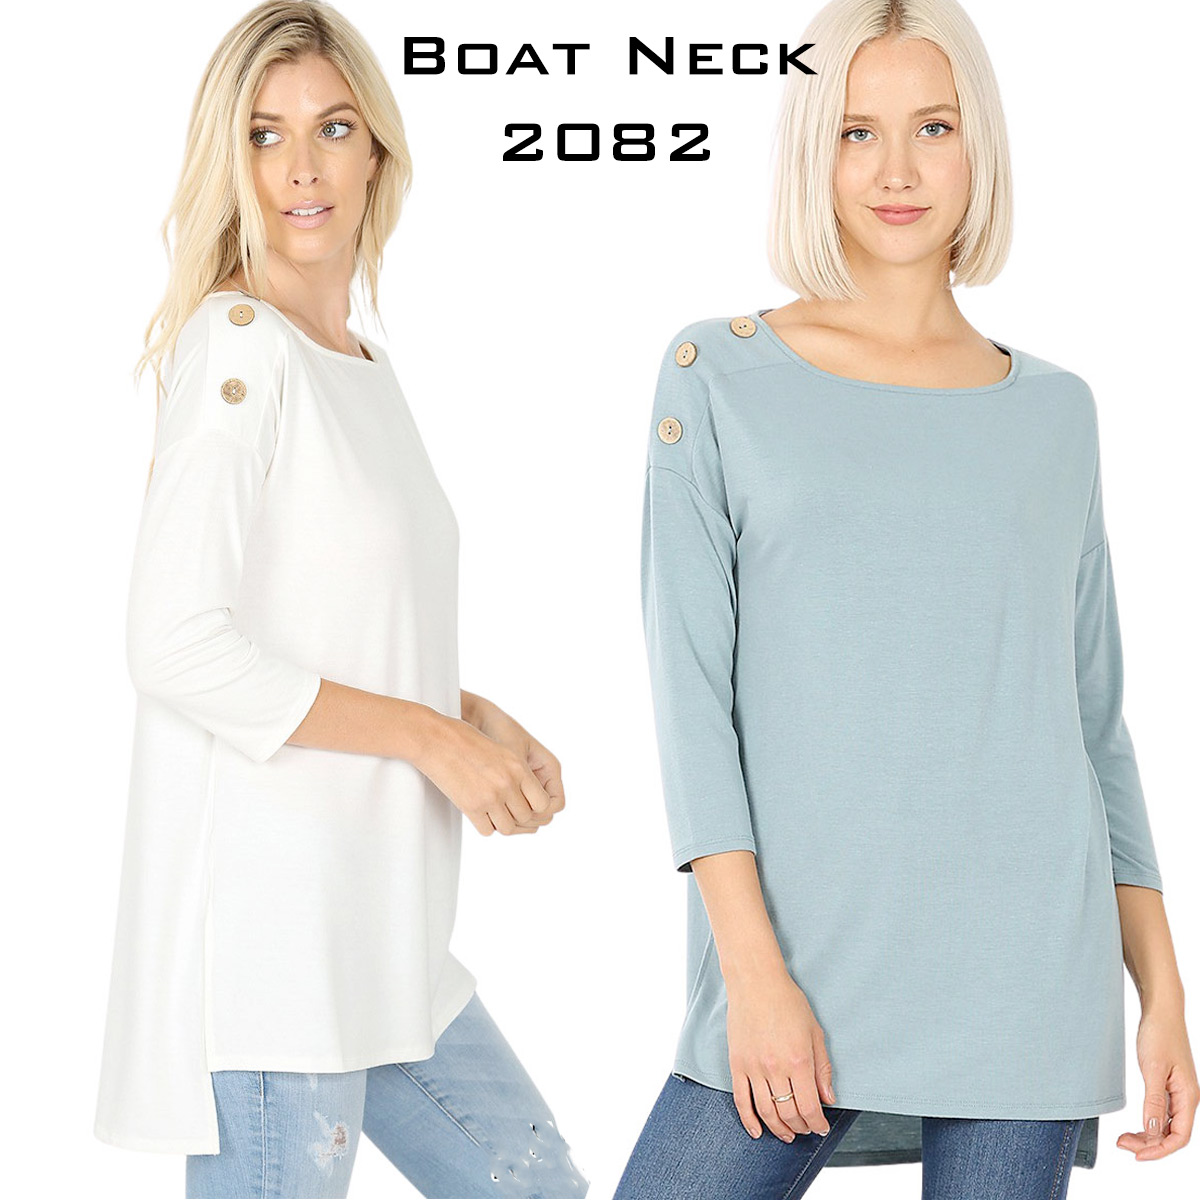 2082 - Boat Neck Hi-Lo Tops w/Wooden Buttons